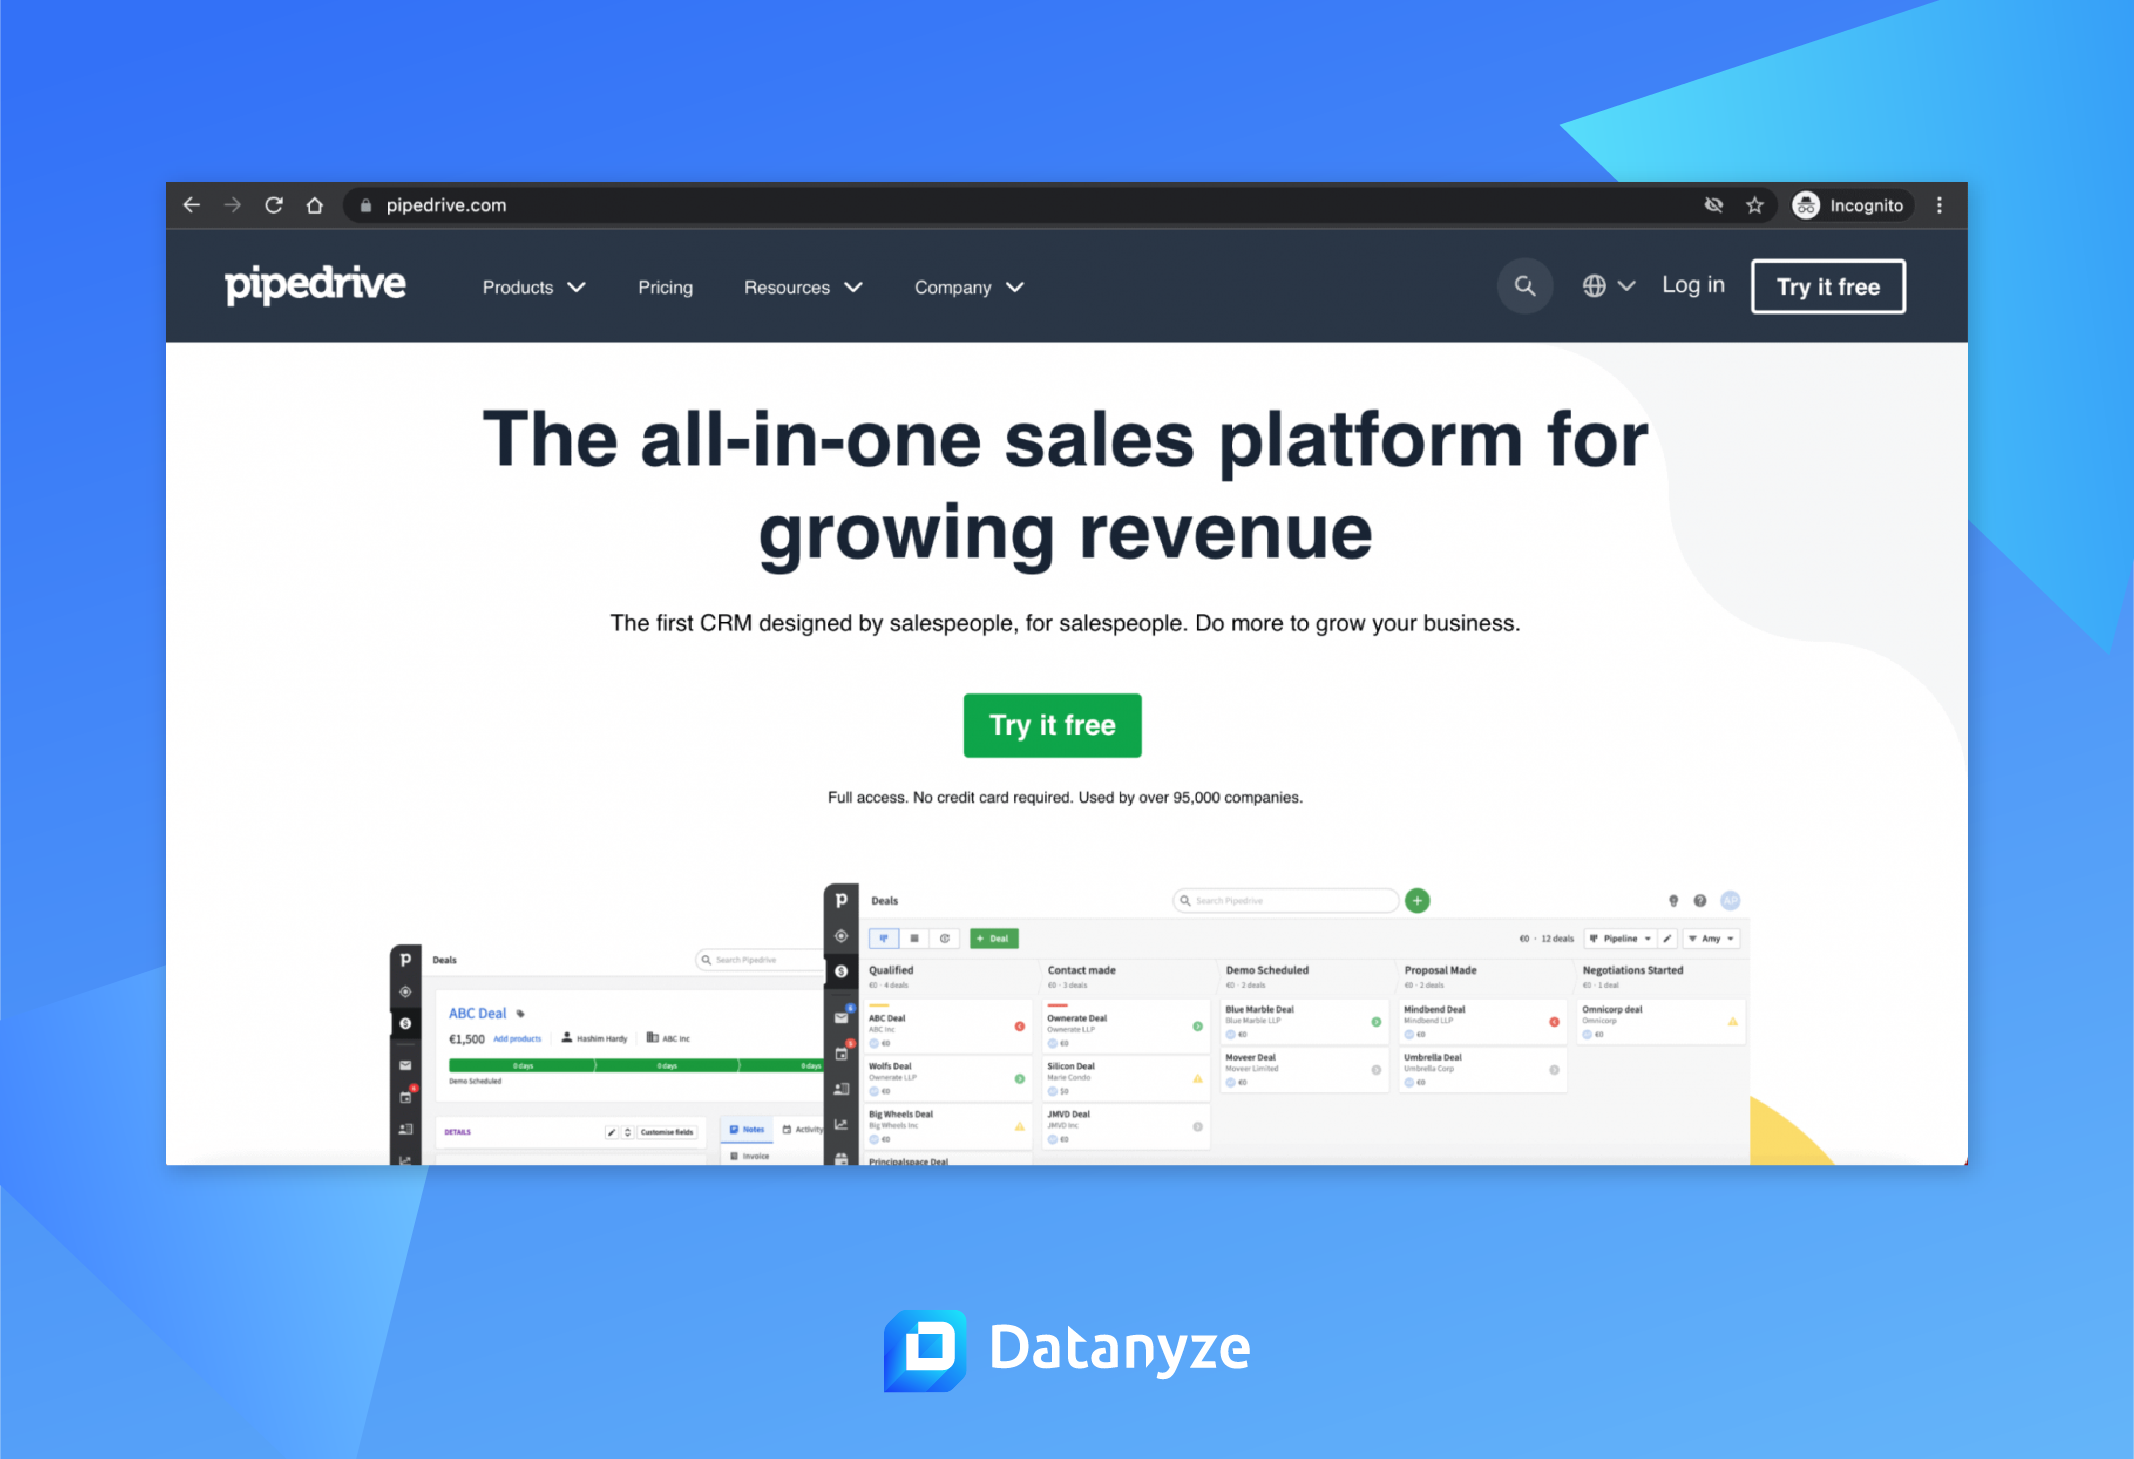 Why is Pipedrive Great for Sales Outreach?